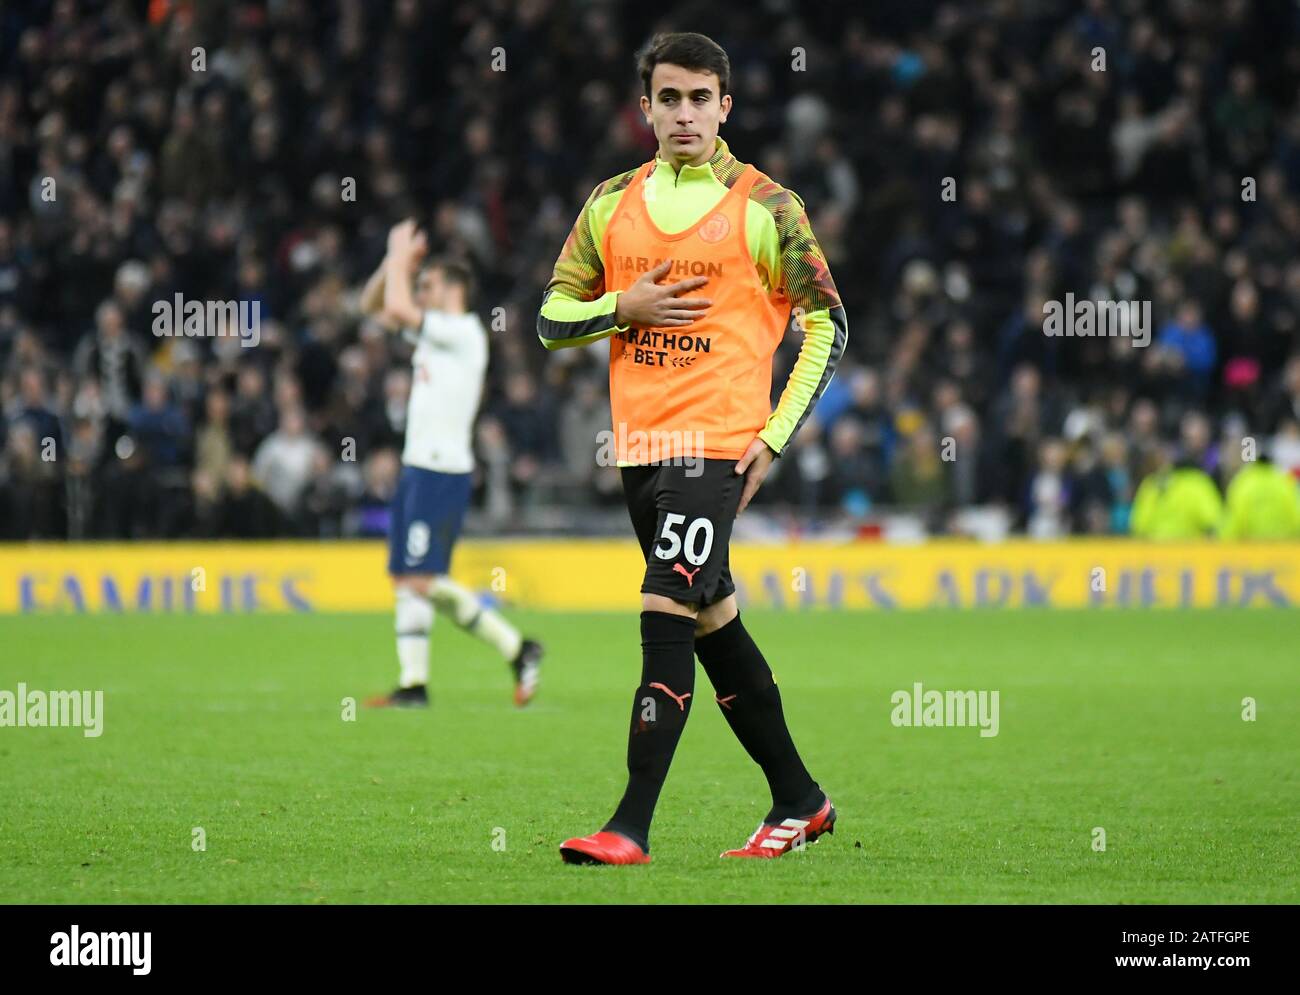 LONDON, ENGLAND - FEBRUARY 2, 2020: Eric Garcia of City pictured during the 2019/20 Premier League game between Tottenham Hotspur FC and Manchester City FC at Tottenham Hotspur Stadium. Stock Photo